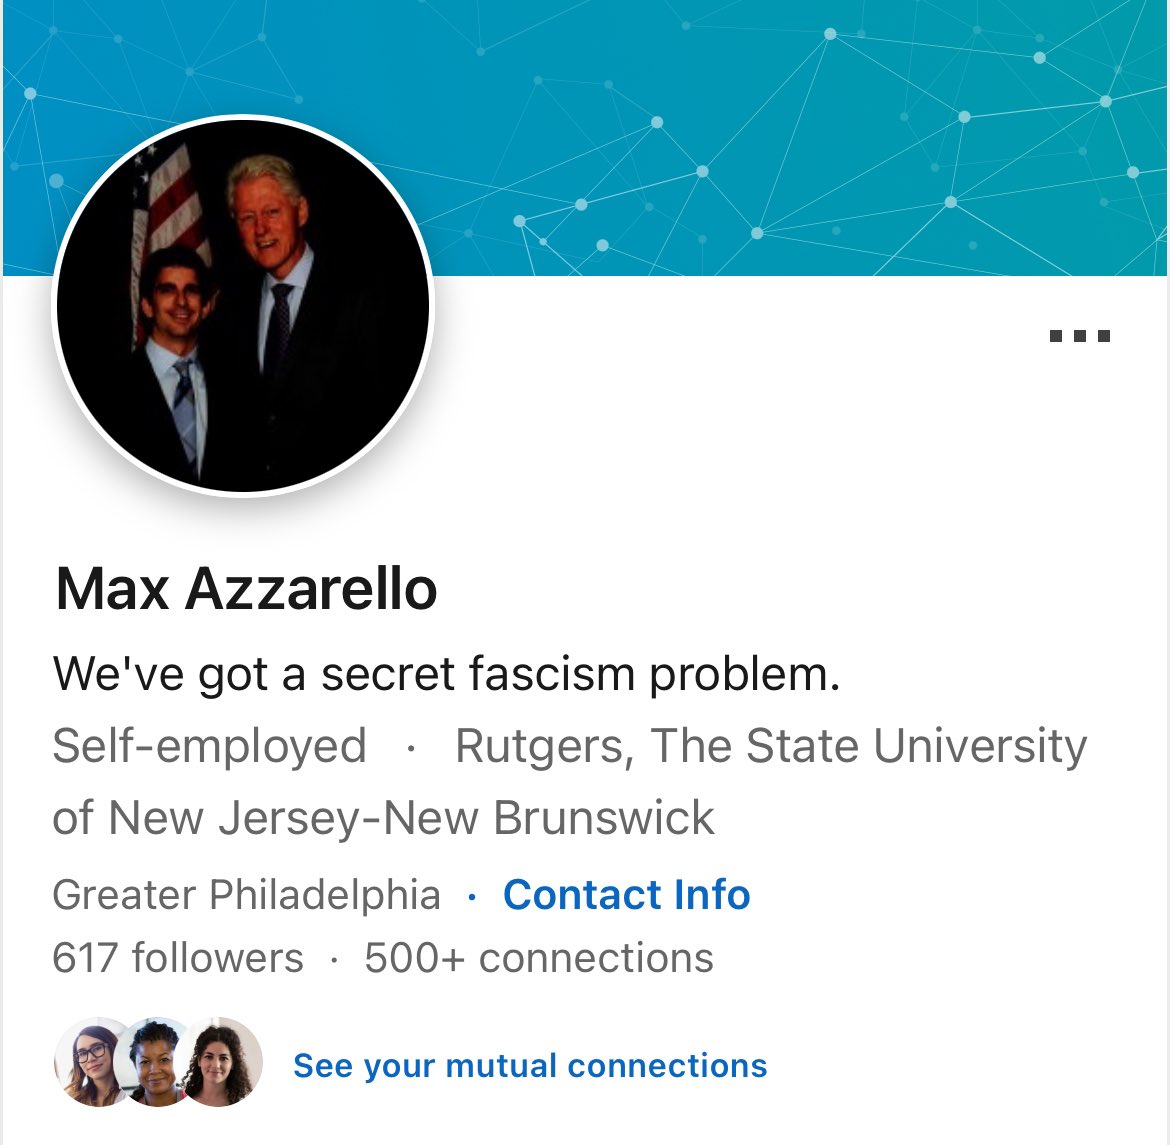 Happening Now: Max Azzarello, a self identified investigative researcher, is the man who set himself on fire outside the Trump trial. He runs a blog in which he claims NYU is ran by the mob and he’s fighting a “totalitarian state.” He left multiple pamphlets at the scene